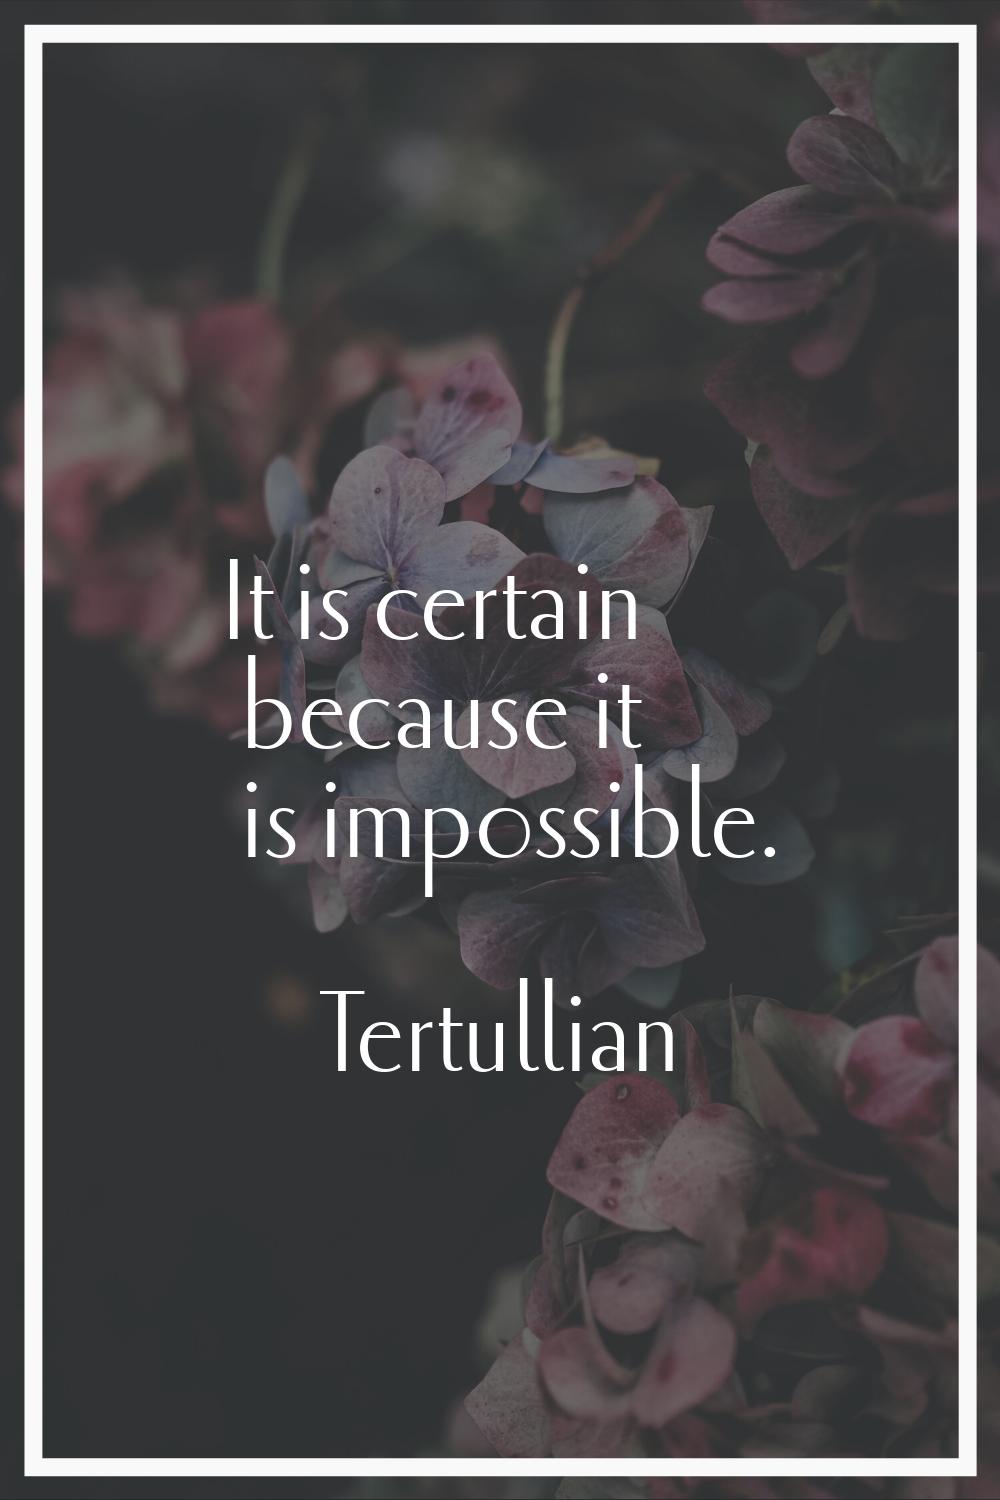 It is certain because it is impossible.